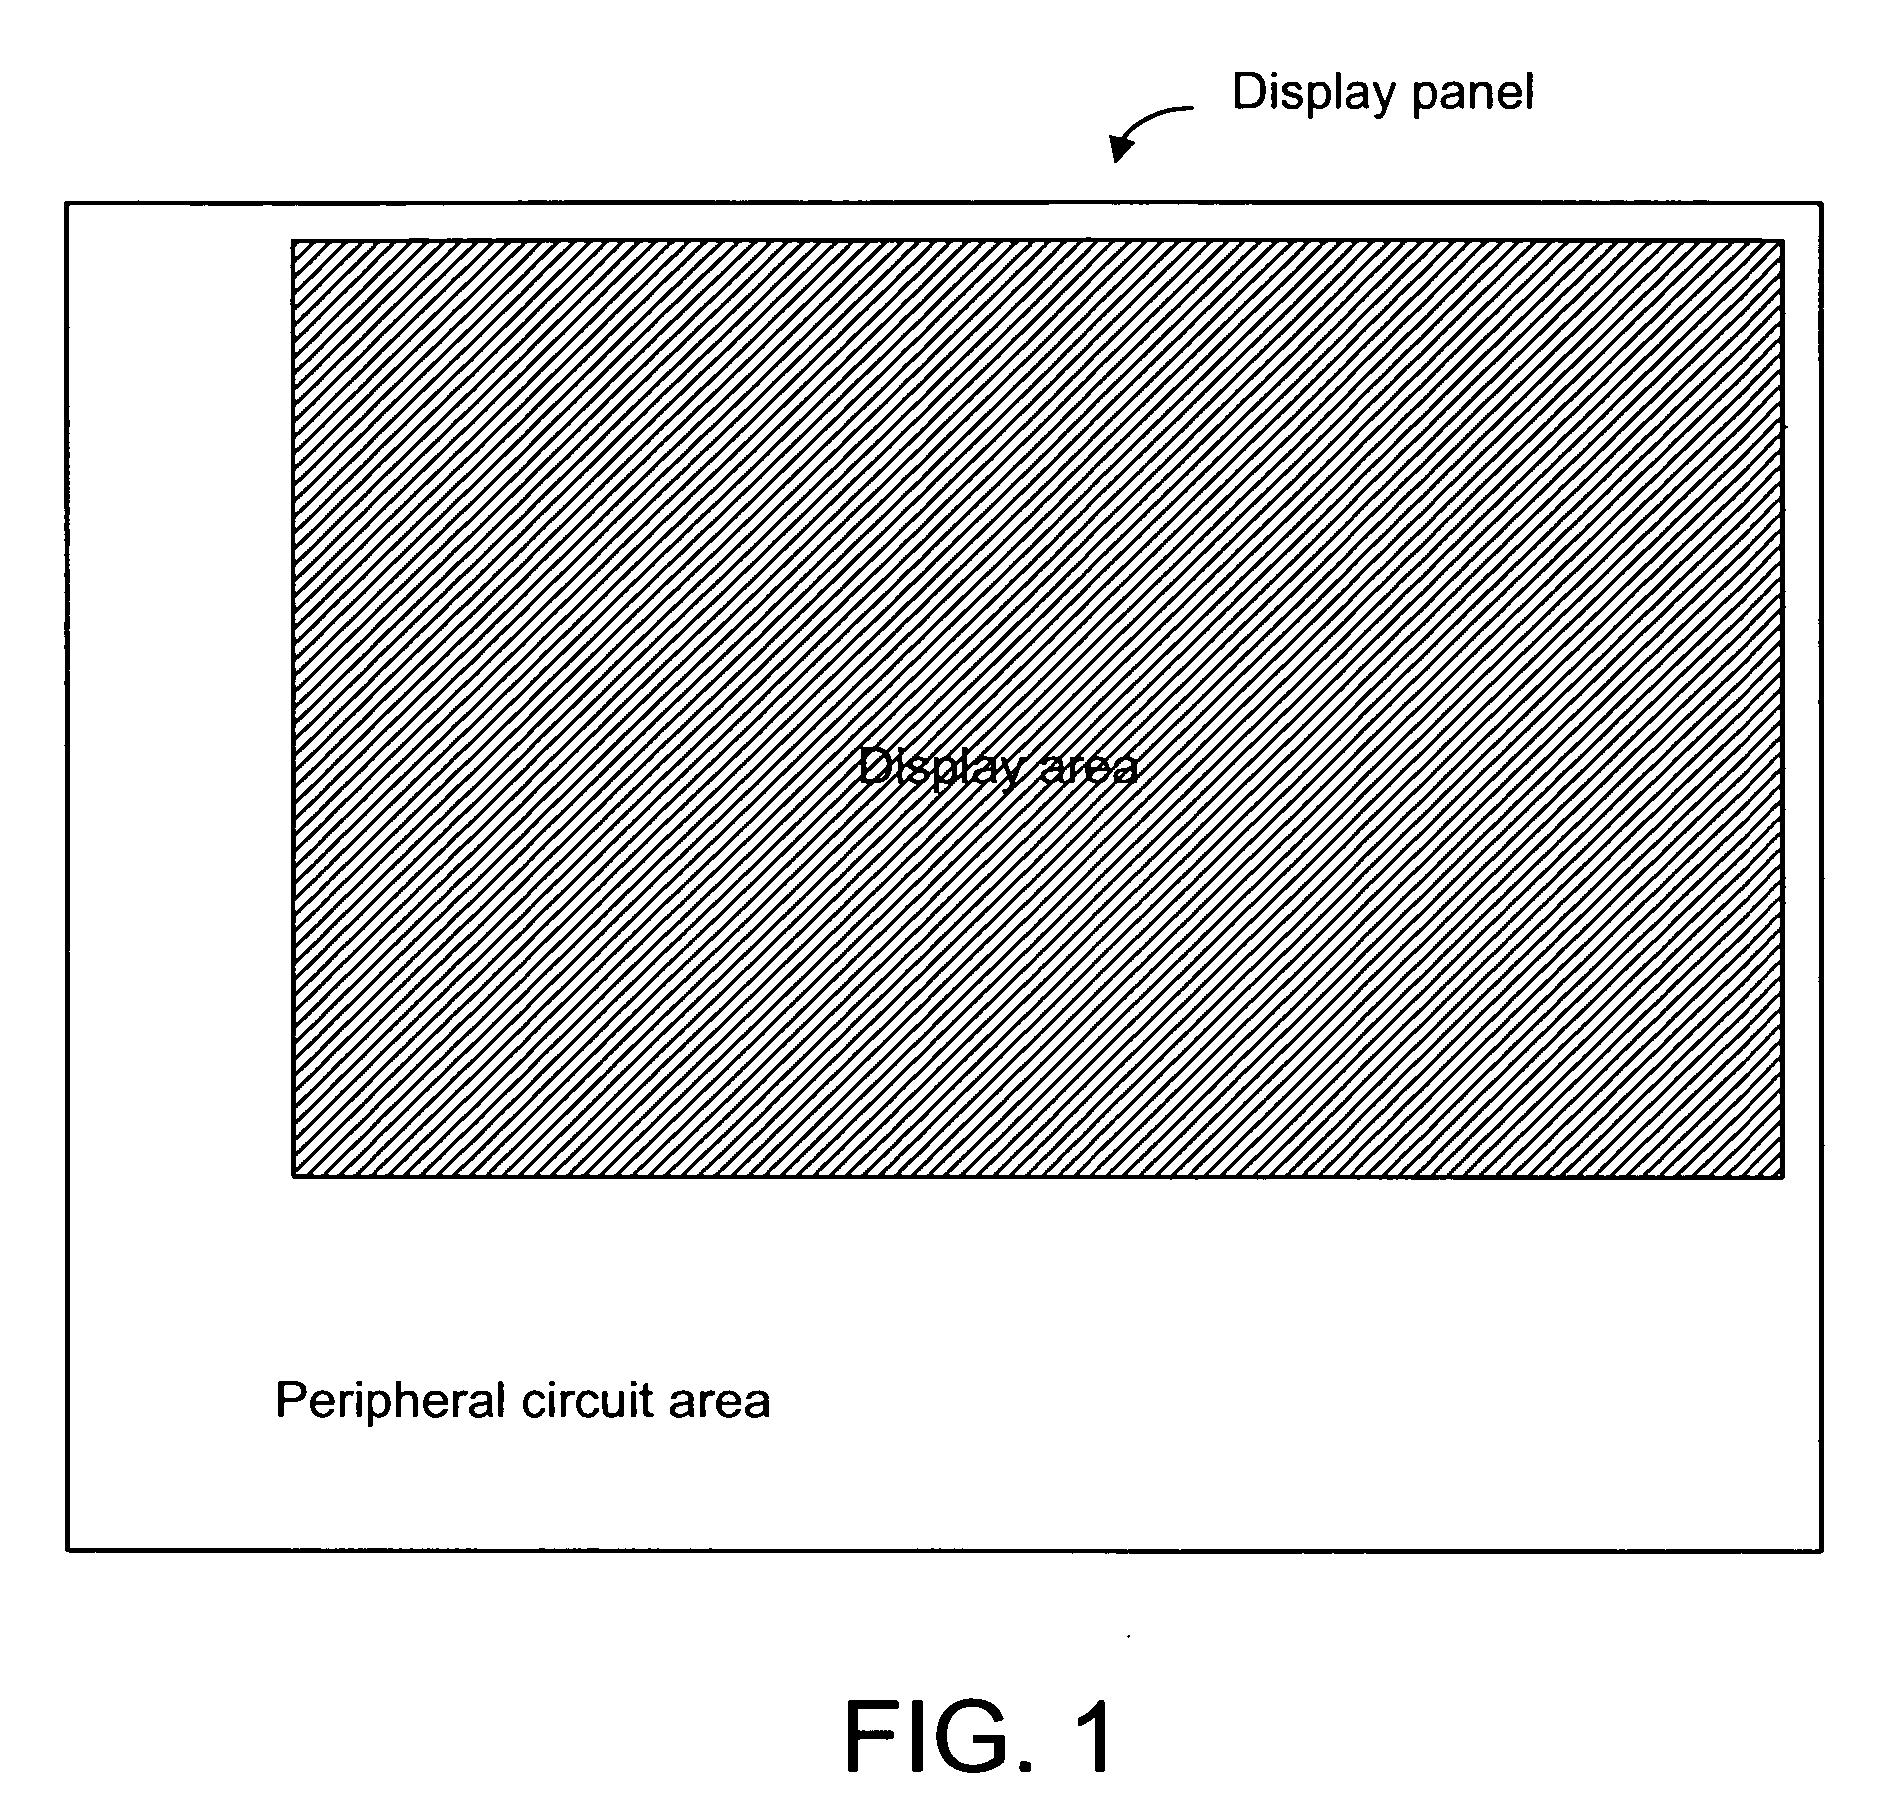 Low-temperature polysilicon display and method for fabricating same